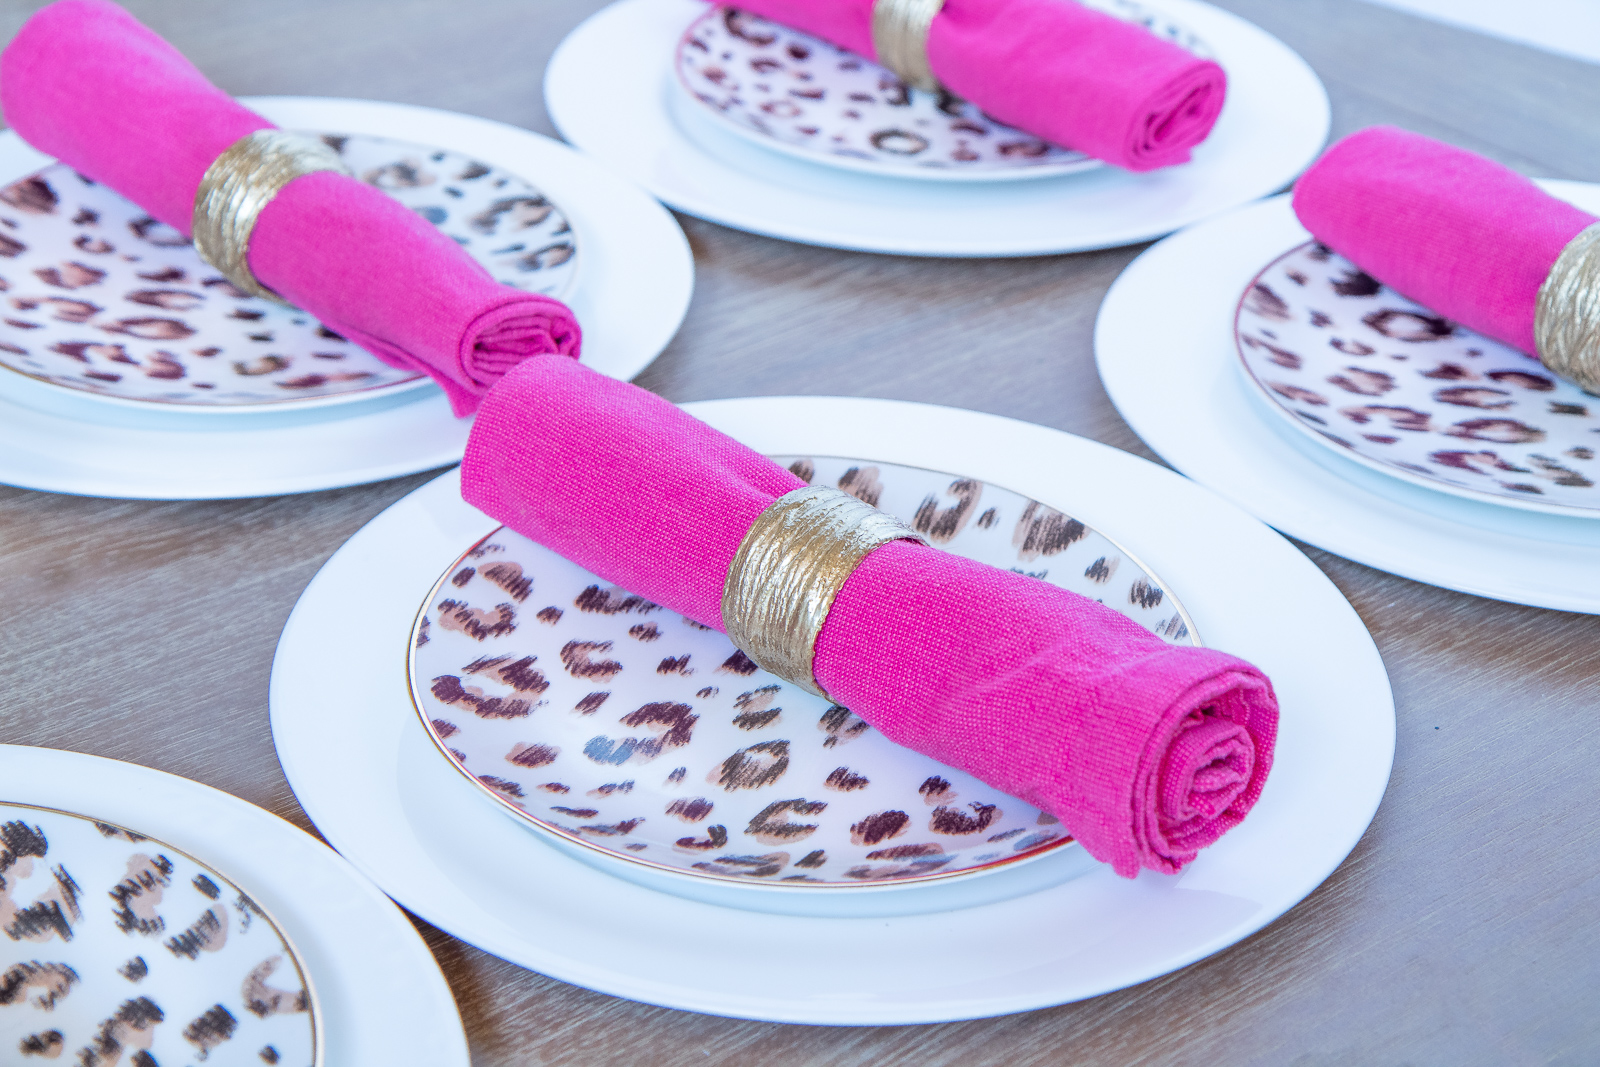 How to make napkin rings out of a toilet paper rolls, twine & glue